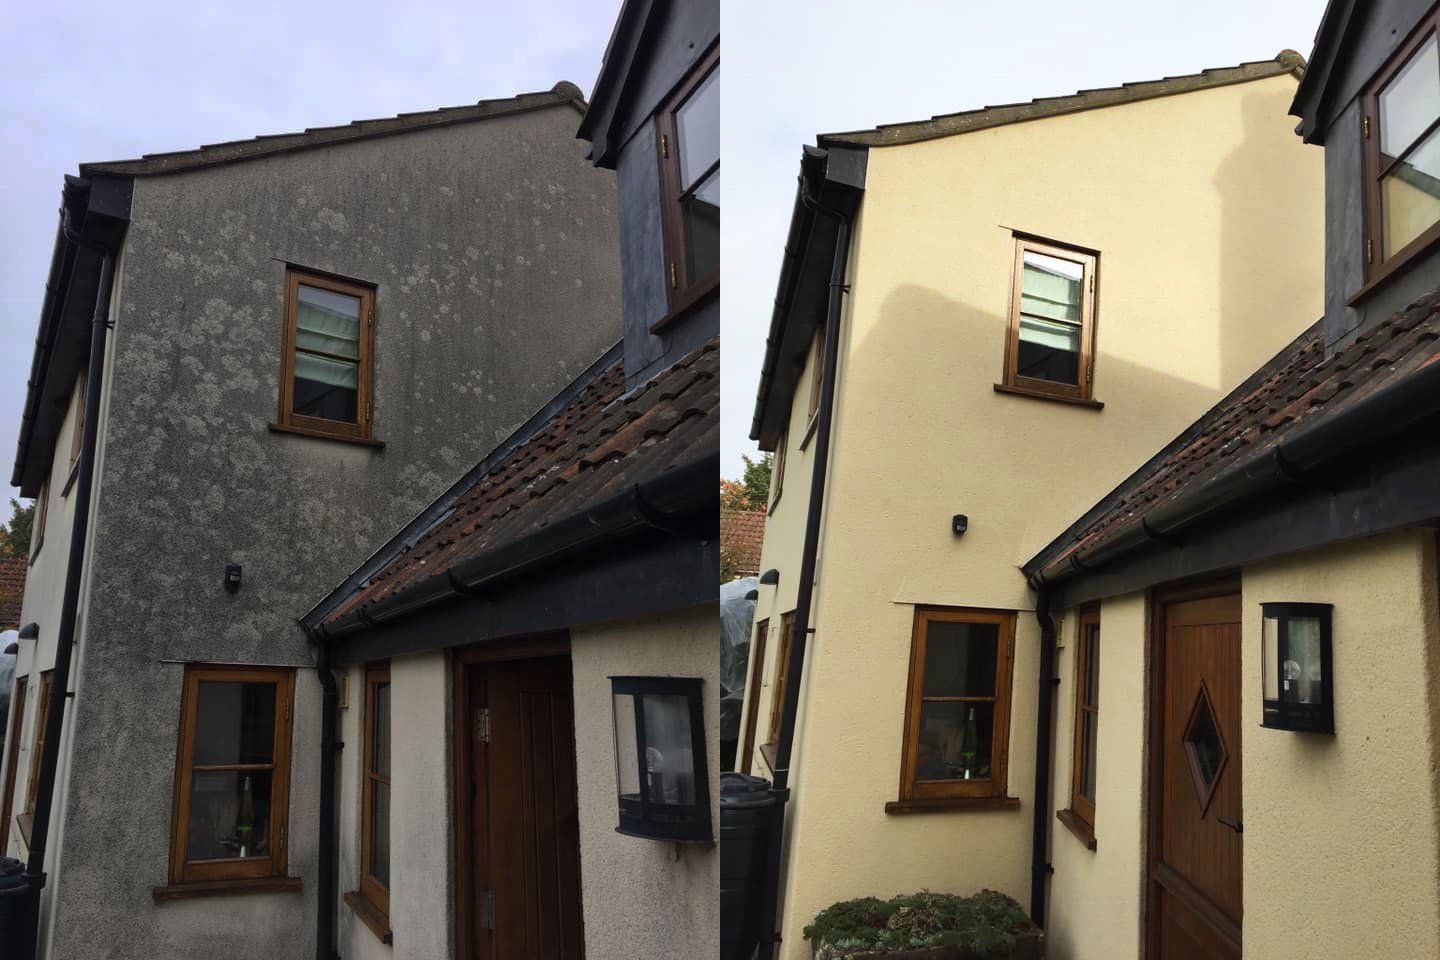 Exterior of house before and after soft washing